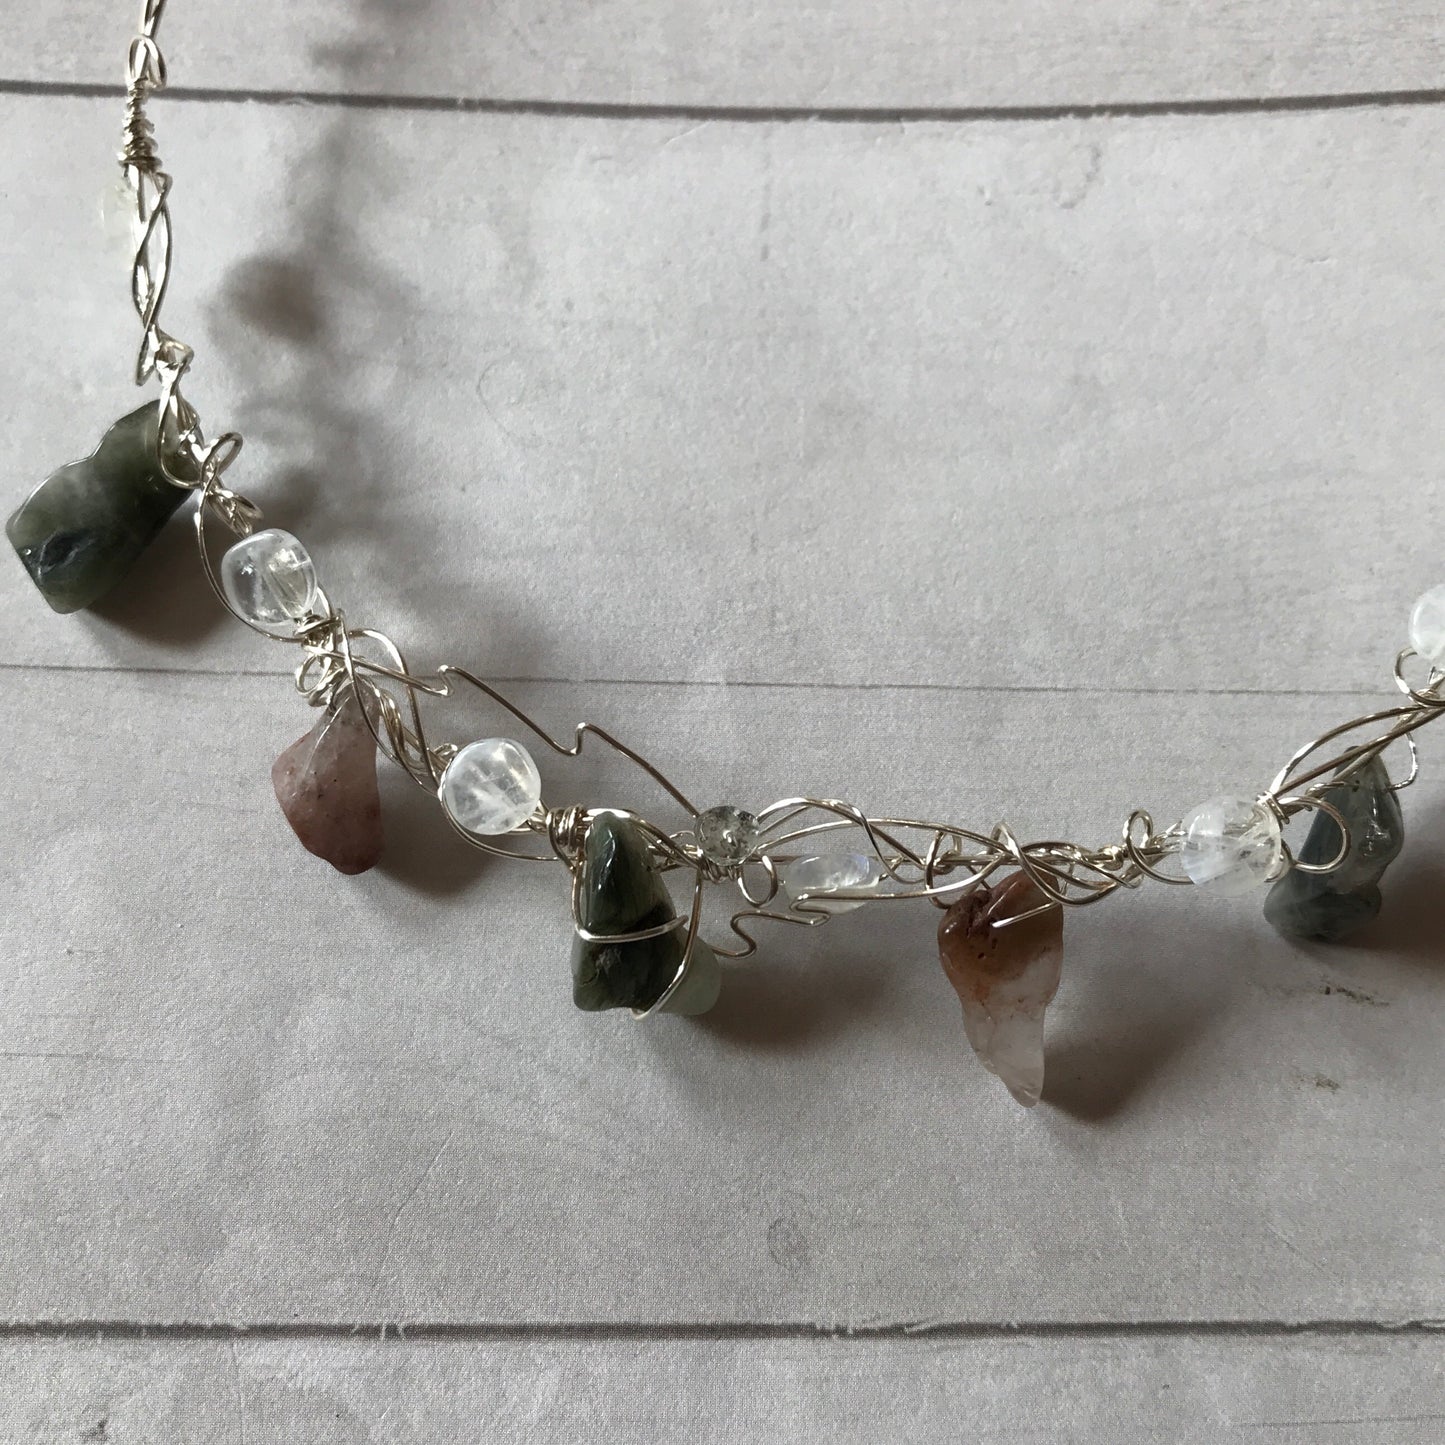 Personal Collection: quartz necklace with rutile/tourmaline inclusions